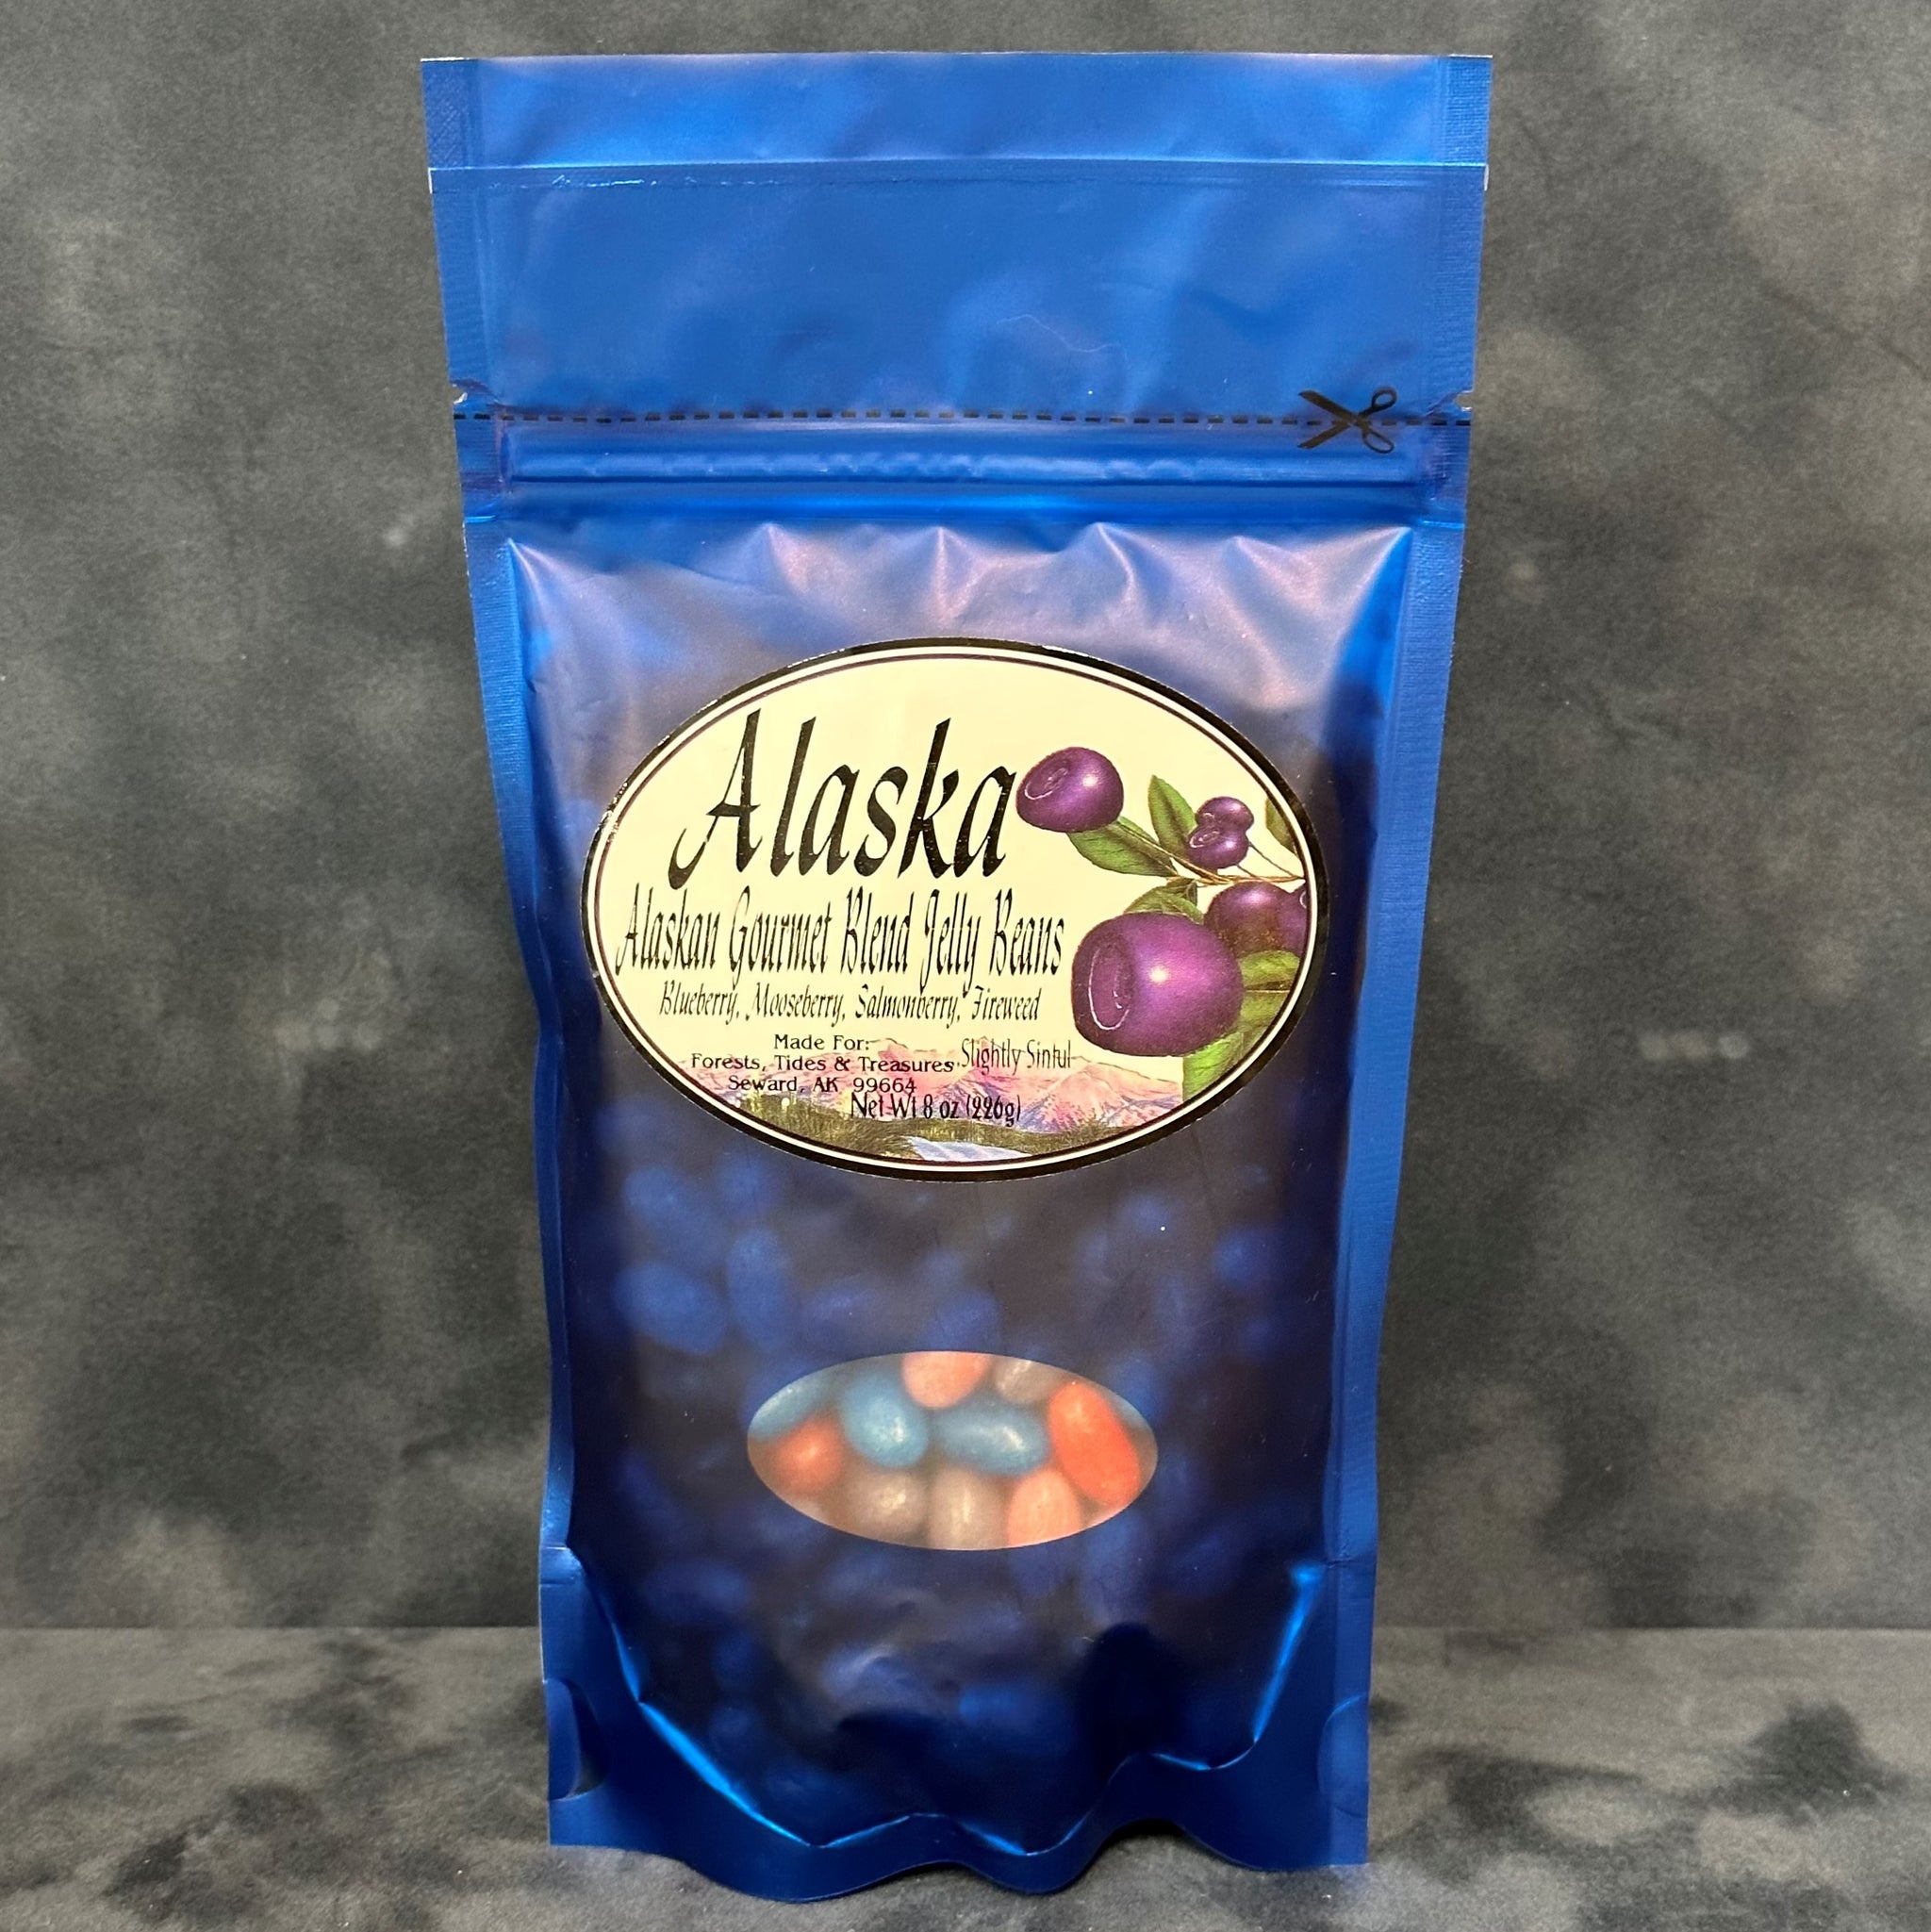 Alaska Jelly Beans - Tides, Treasures Forests, and